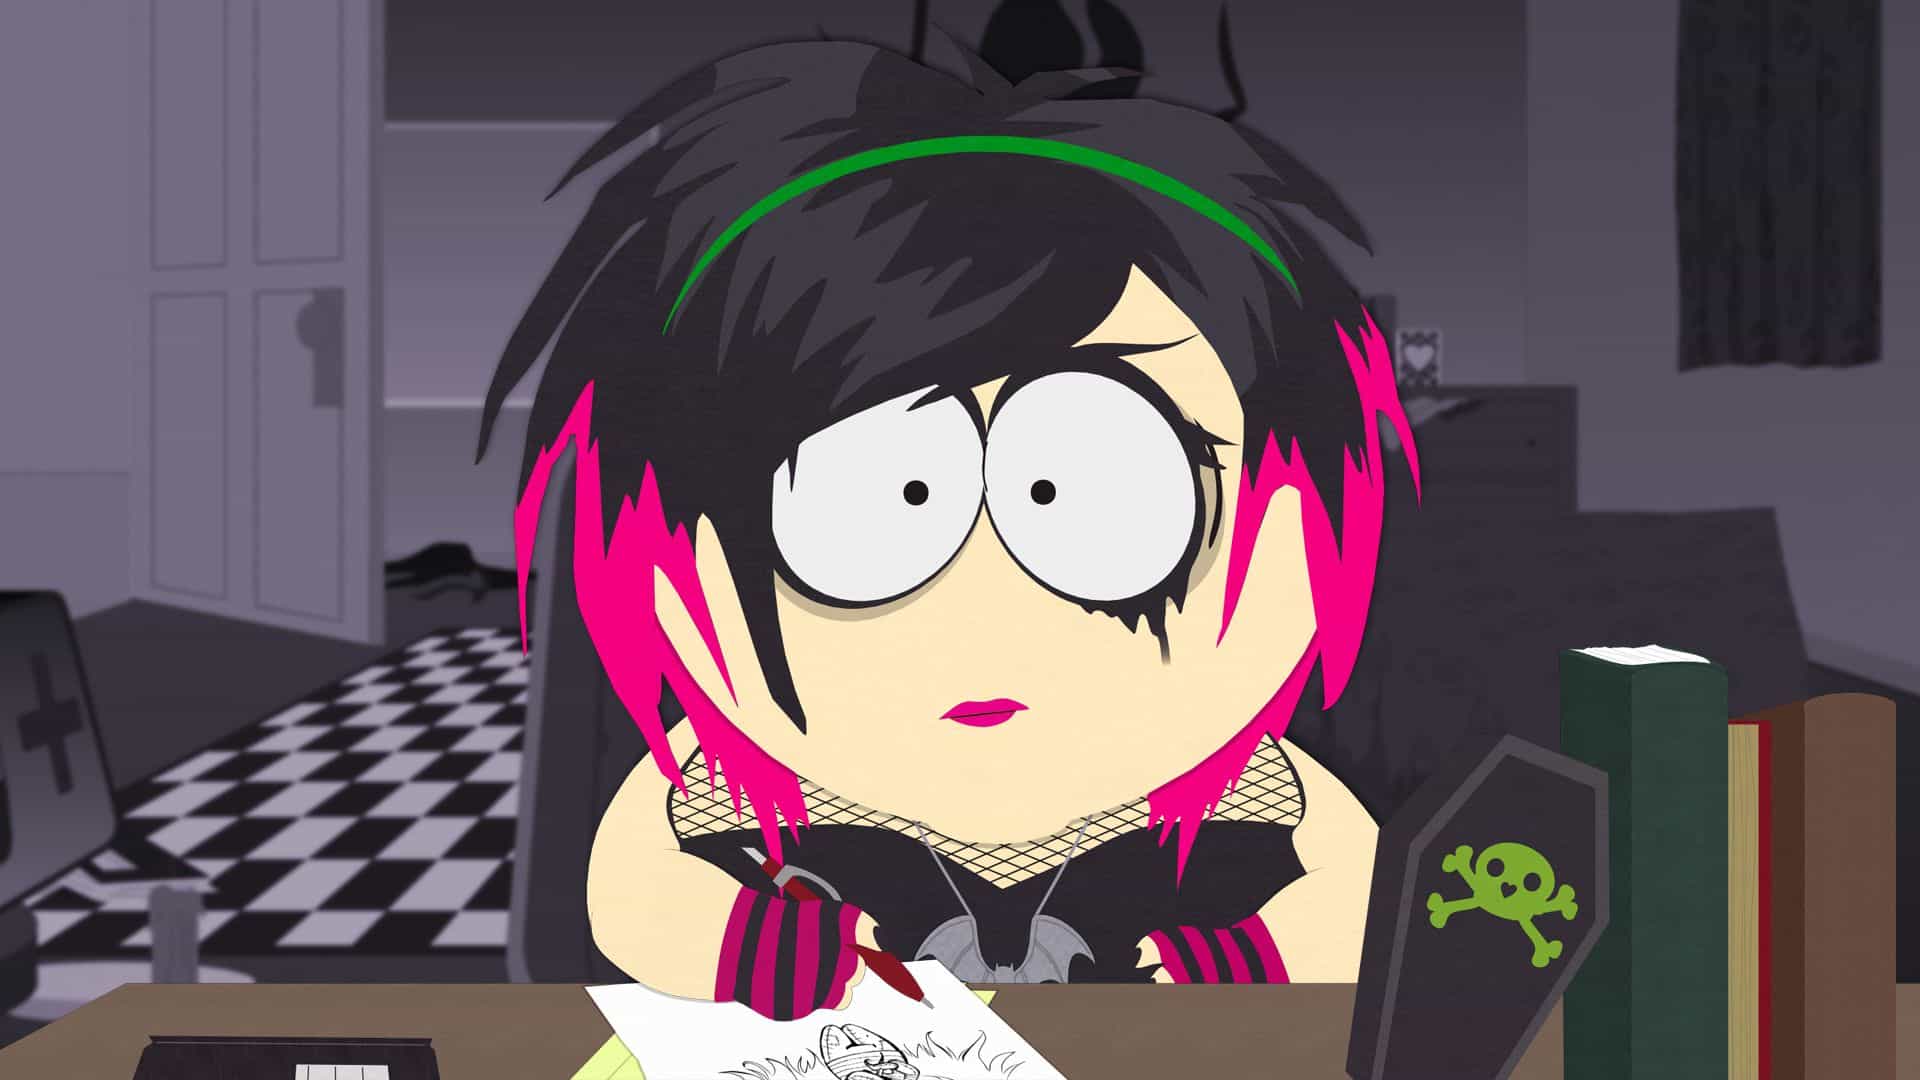 South Park s17e04 - Goth Kids 3: Dawn of the Posers